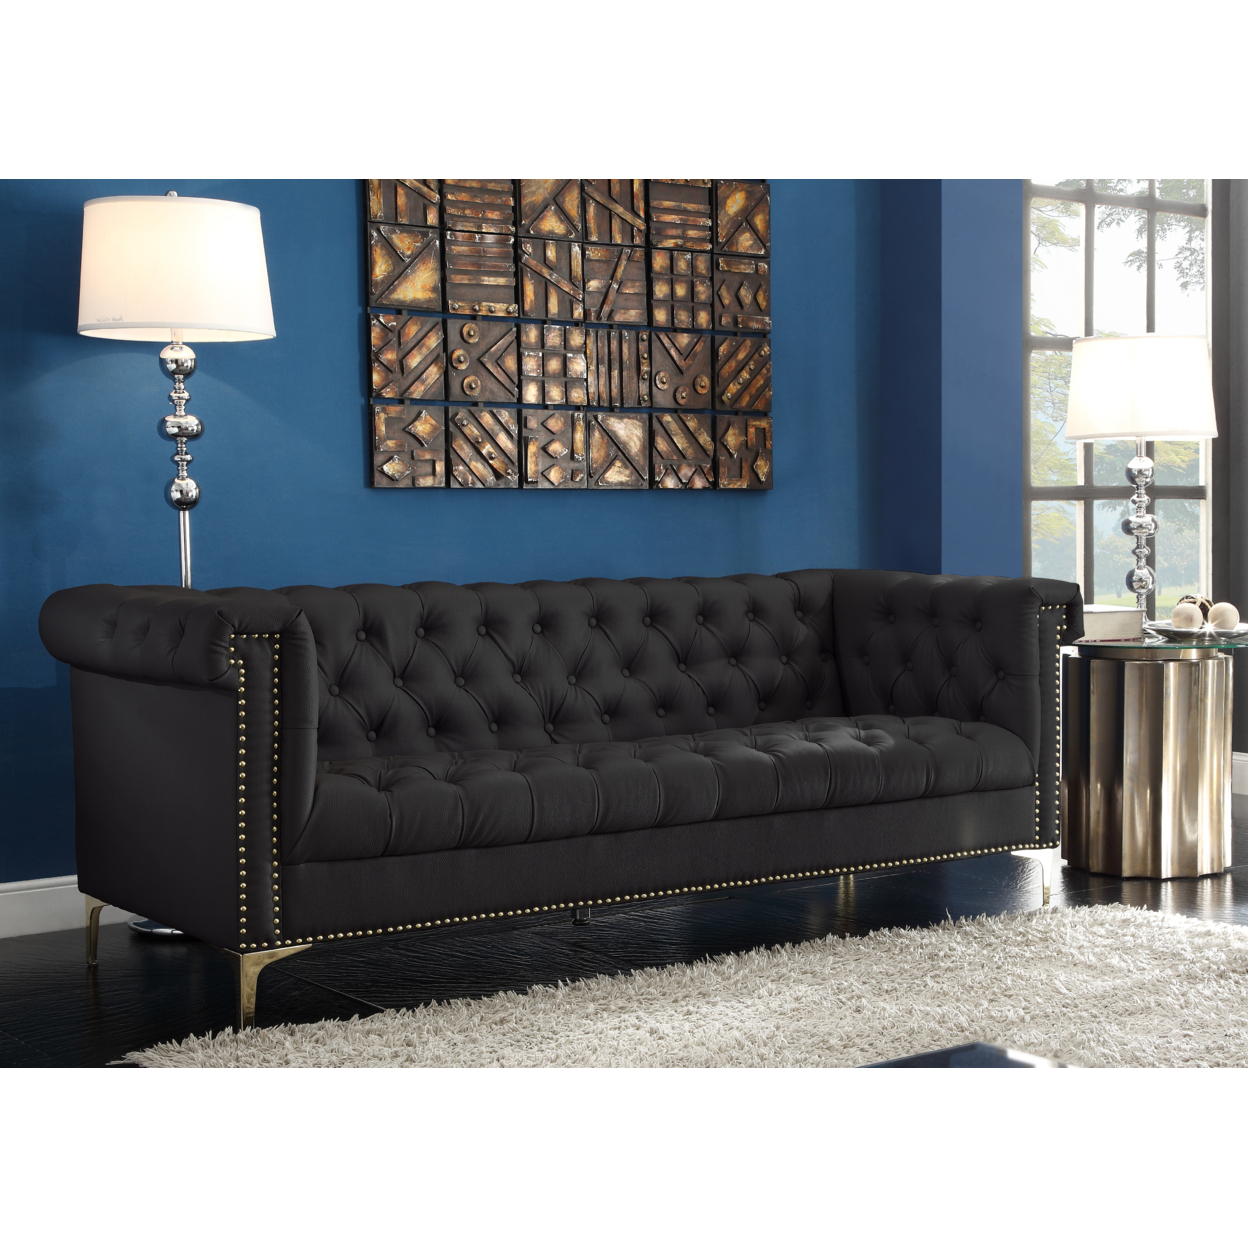 MacArthur PU Leather Modern Contemporary Button Tufted With Gold Nailhead Trim Goldtone Metal Y-leg Sofa - Brown